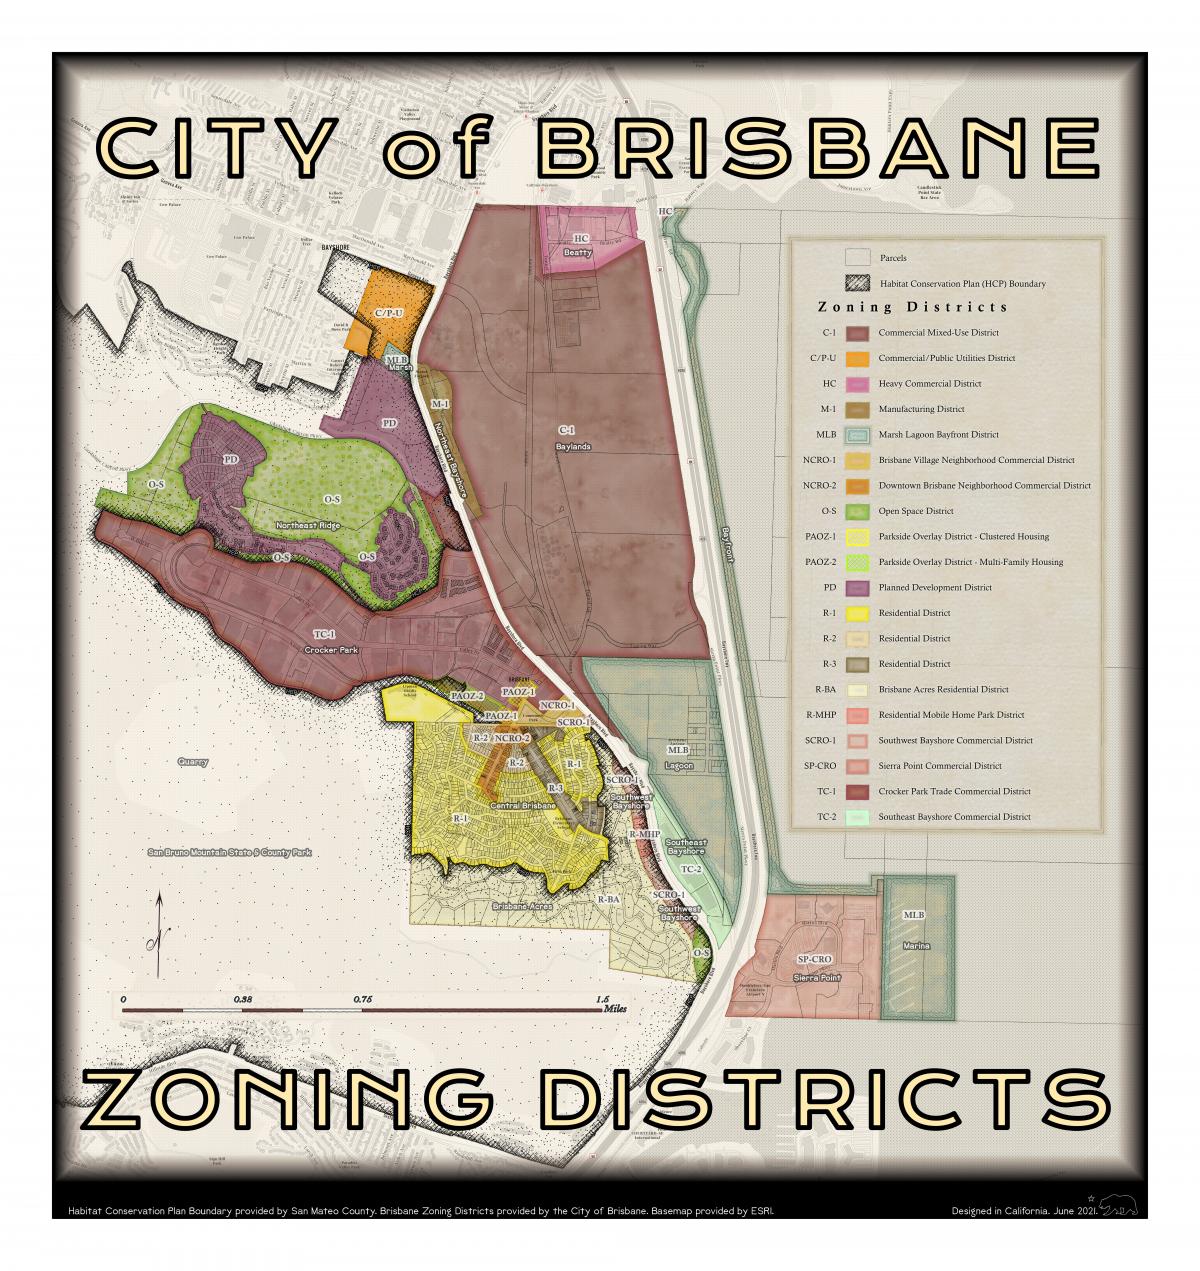 Zoning Districts in Brisbane CA